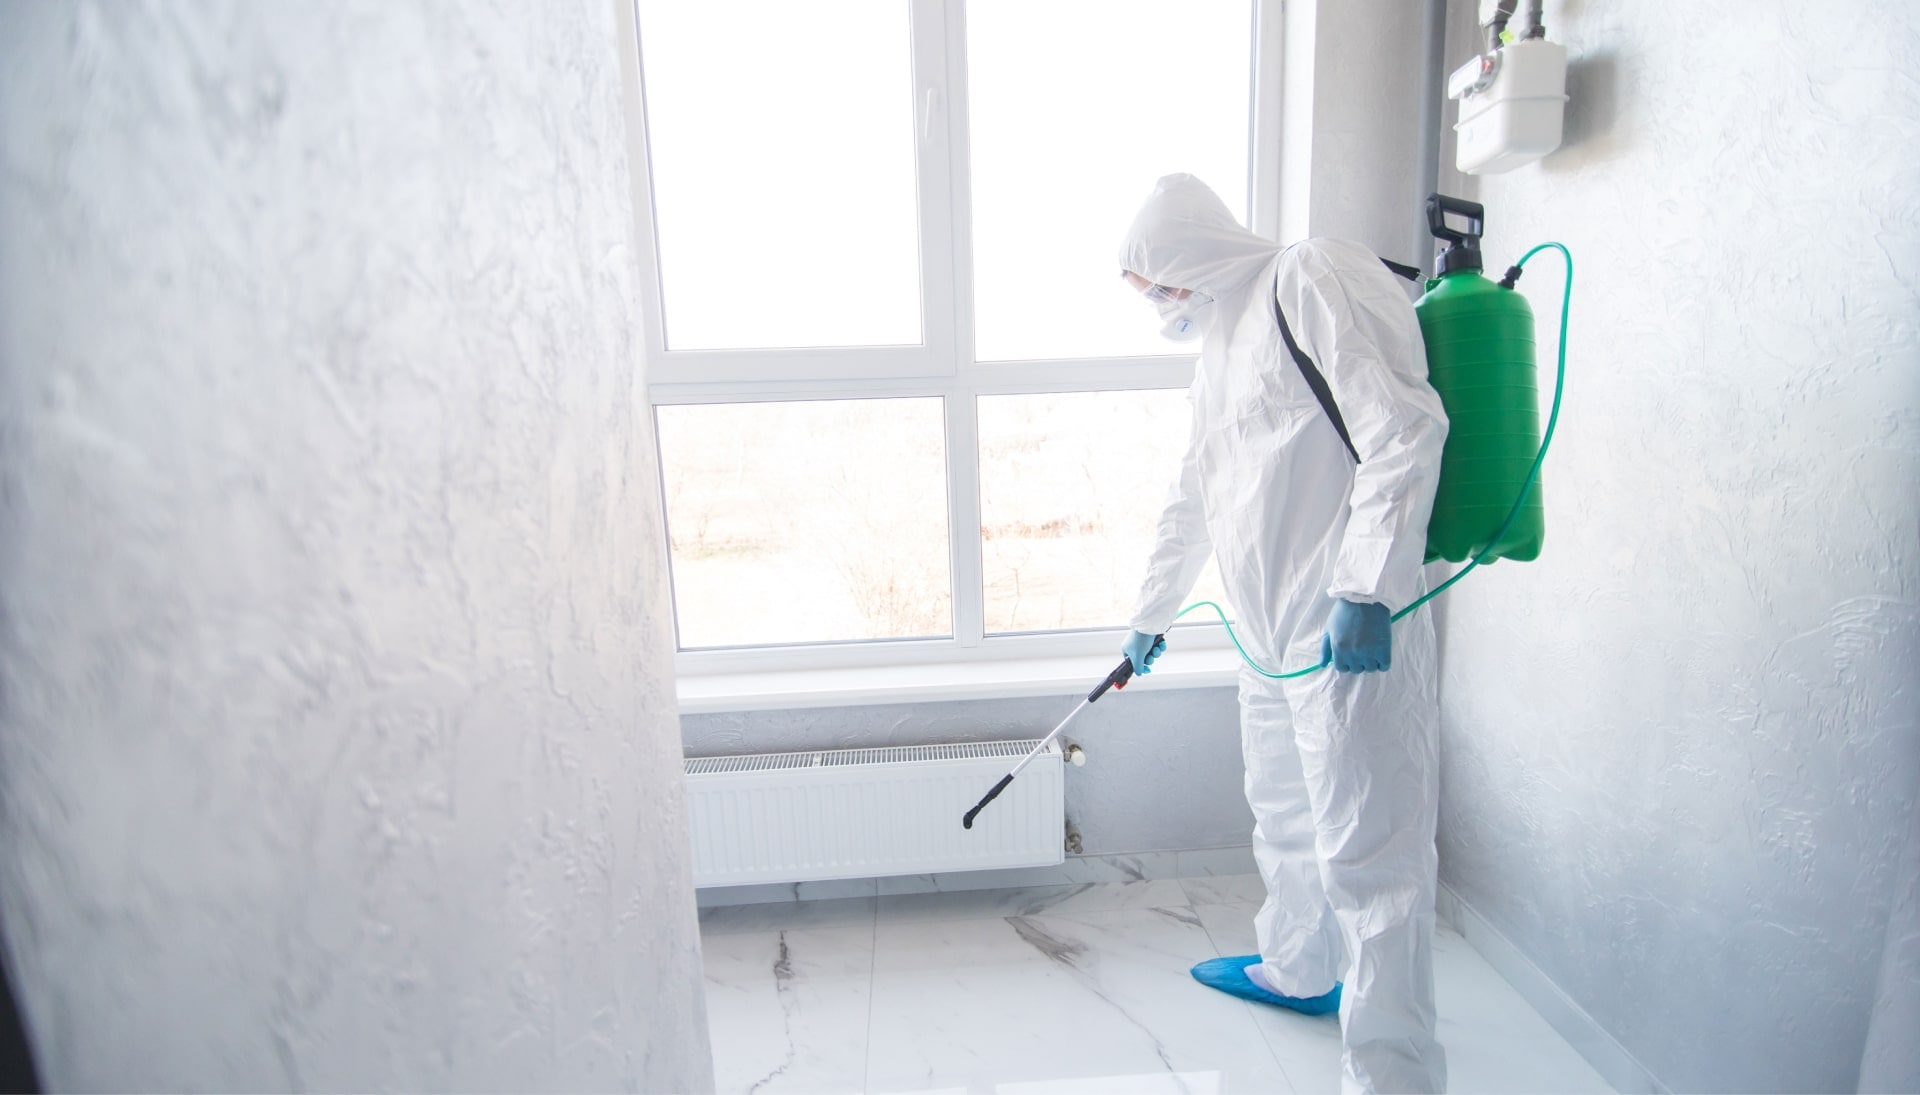 We provide the highest-quality mold inspection, testing, and removal services in the Cleveland, Ohio area.